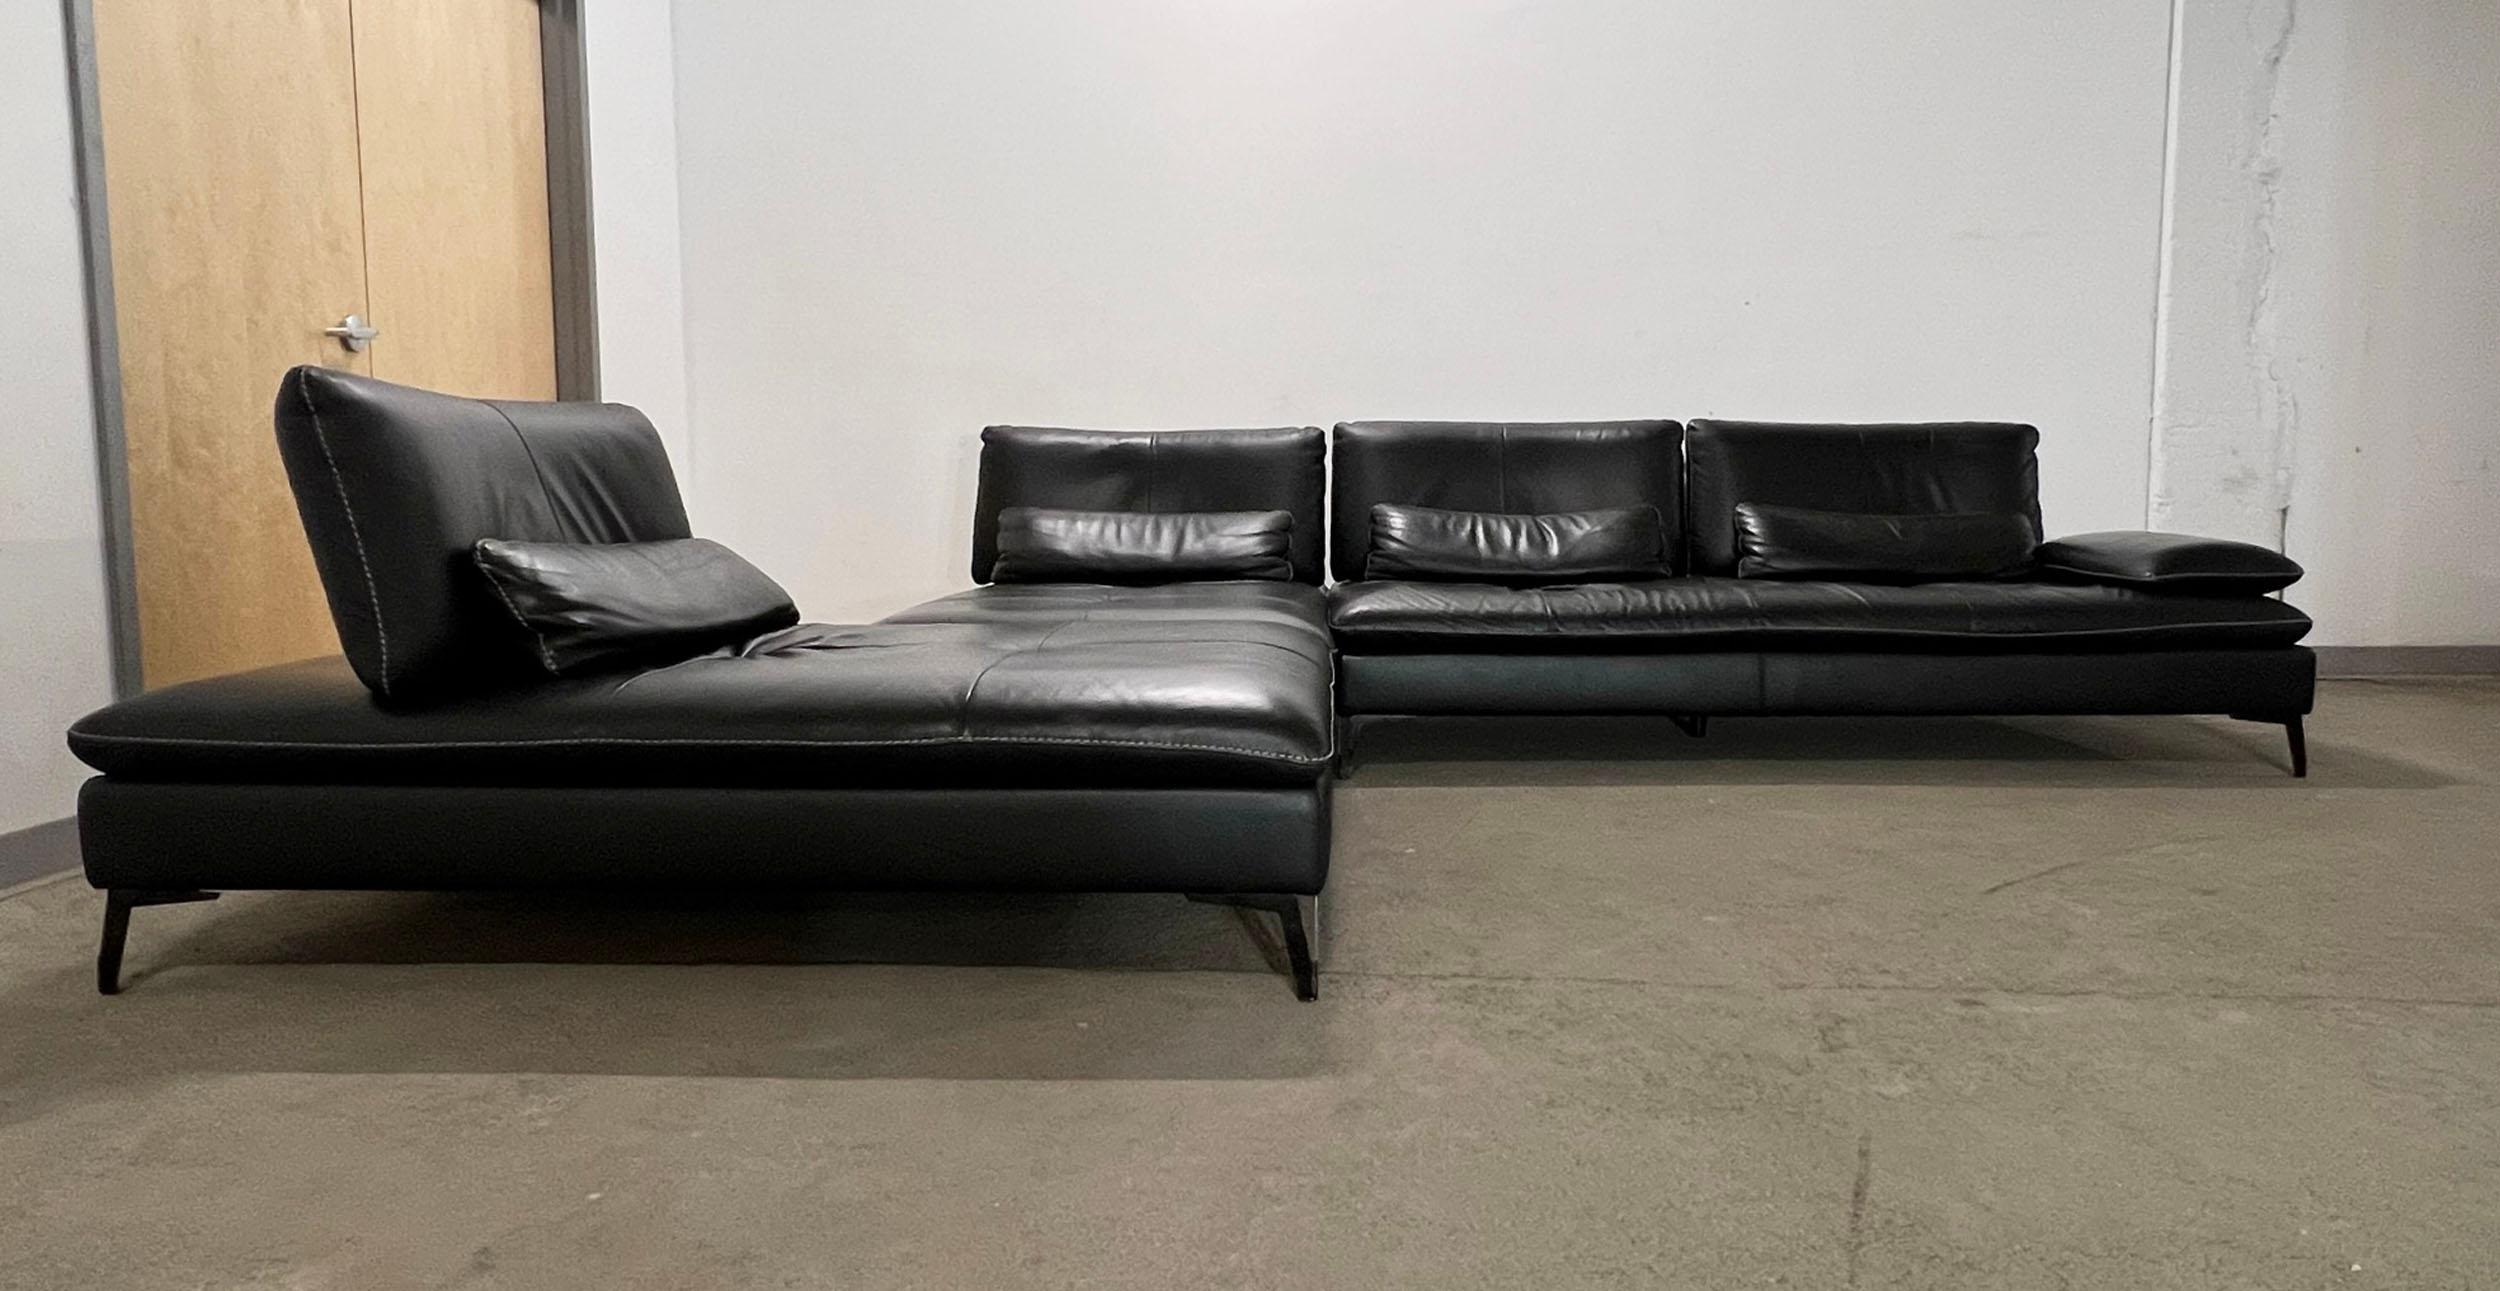 A vintage three piece modular leather “Scenario” sectional sofa designed by Sacha Lakic for the French design firm Roche Bobois. Consists of two identical chaise longue with adjustable backrests and a full sized sofa with right side armrest, also